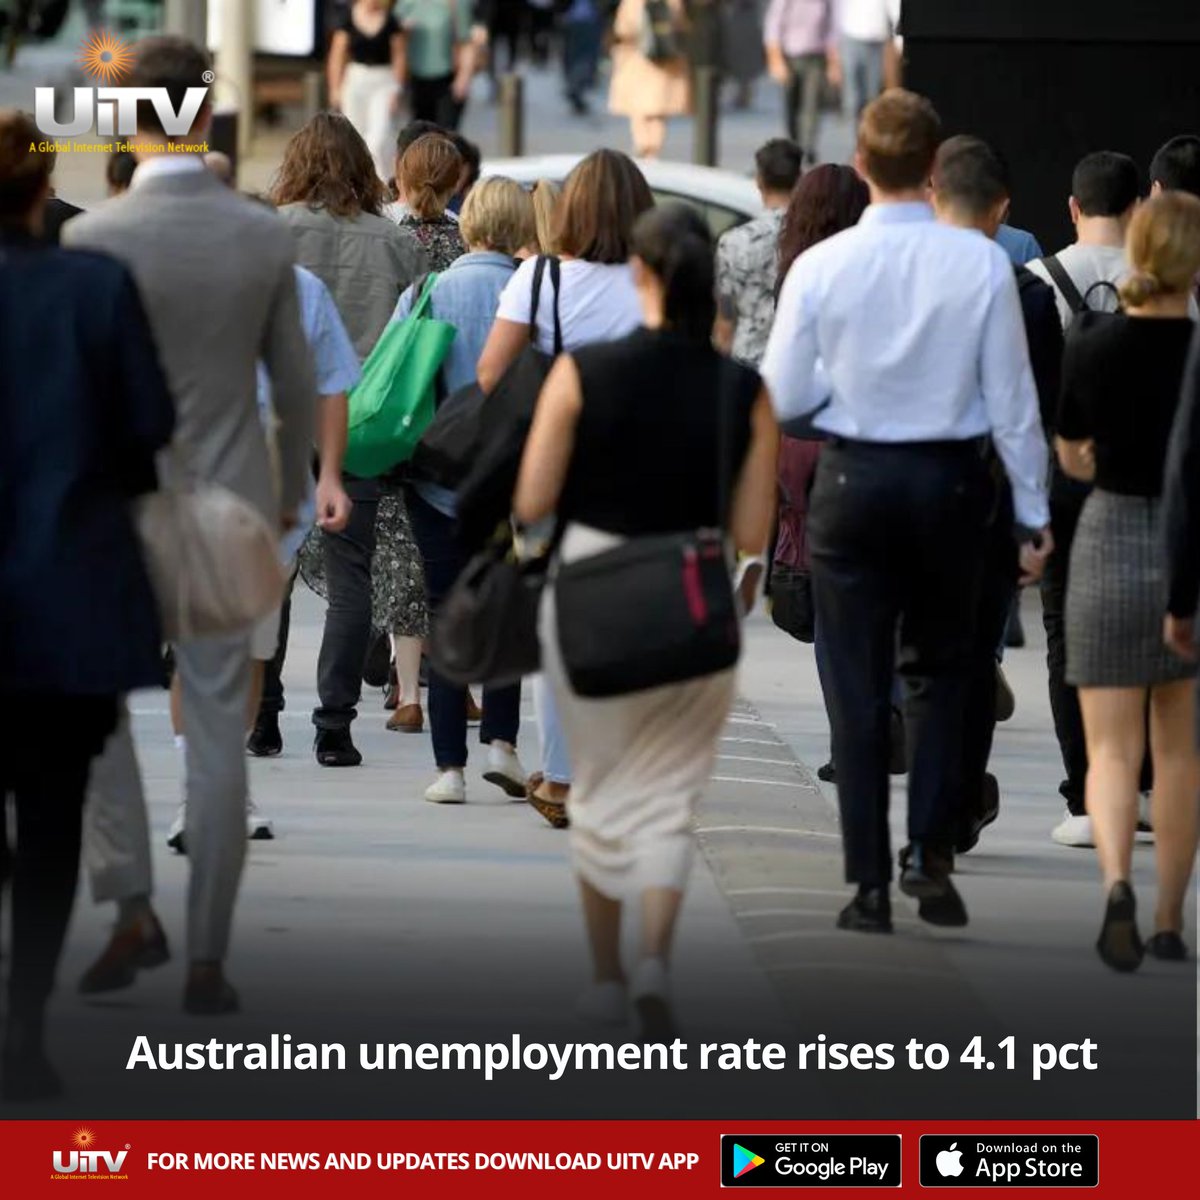 Latest stats are in: Australia's unemployment rate has risen to 4.1%. Let's keep supporting each other through these economic shifts. Together, we can navigate challenges and strive for better opportunities. 💪 #Australia #Unemployment #EconomicUpdate